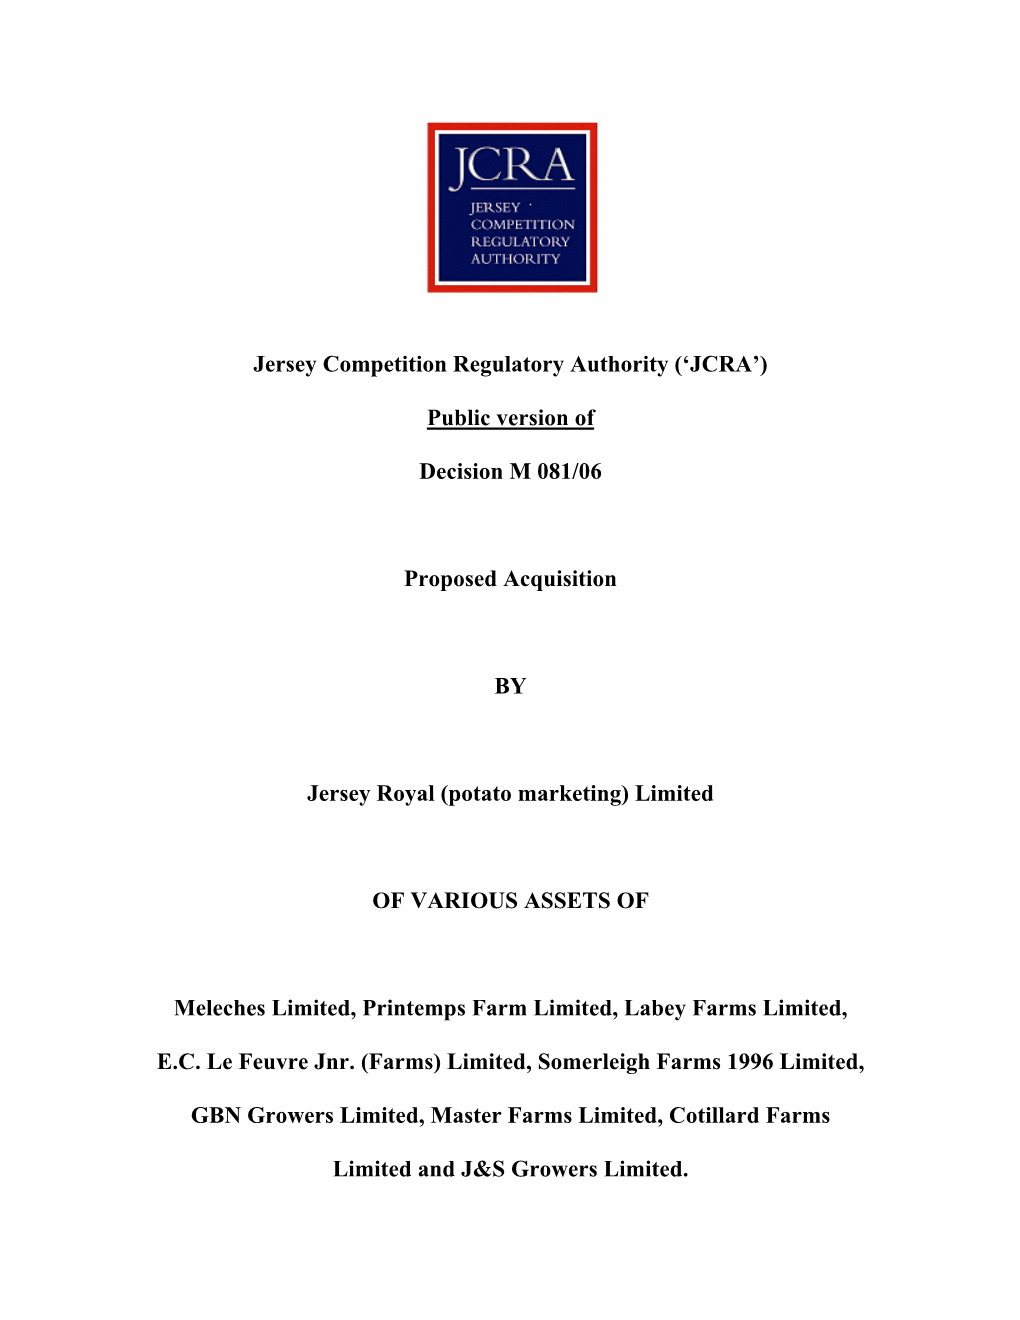 Jersey Competition Regulatory Authority ('JCRA') Public Version of Decision M 081/06 Proposed Acquisition by Jersey Royal (